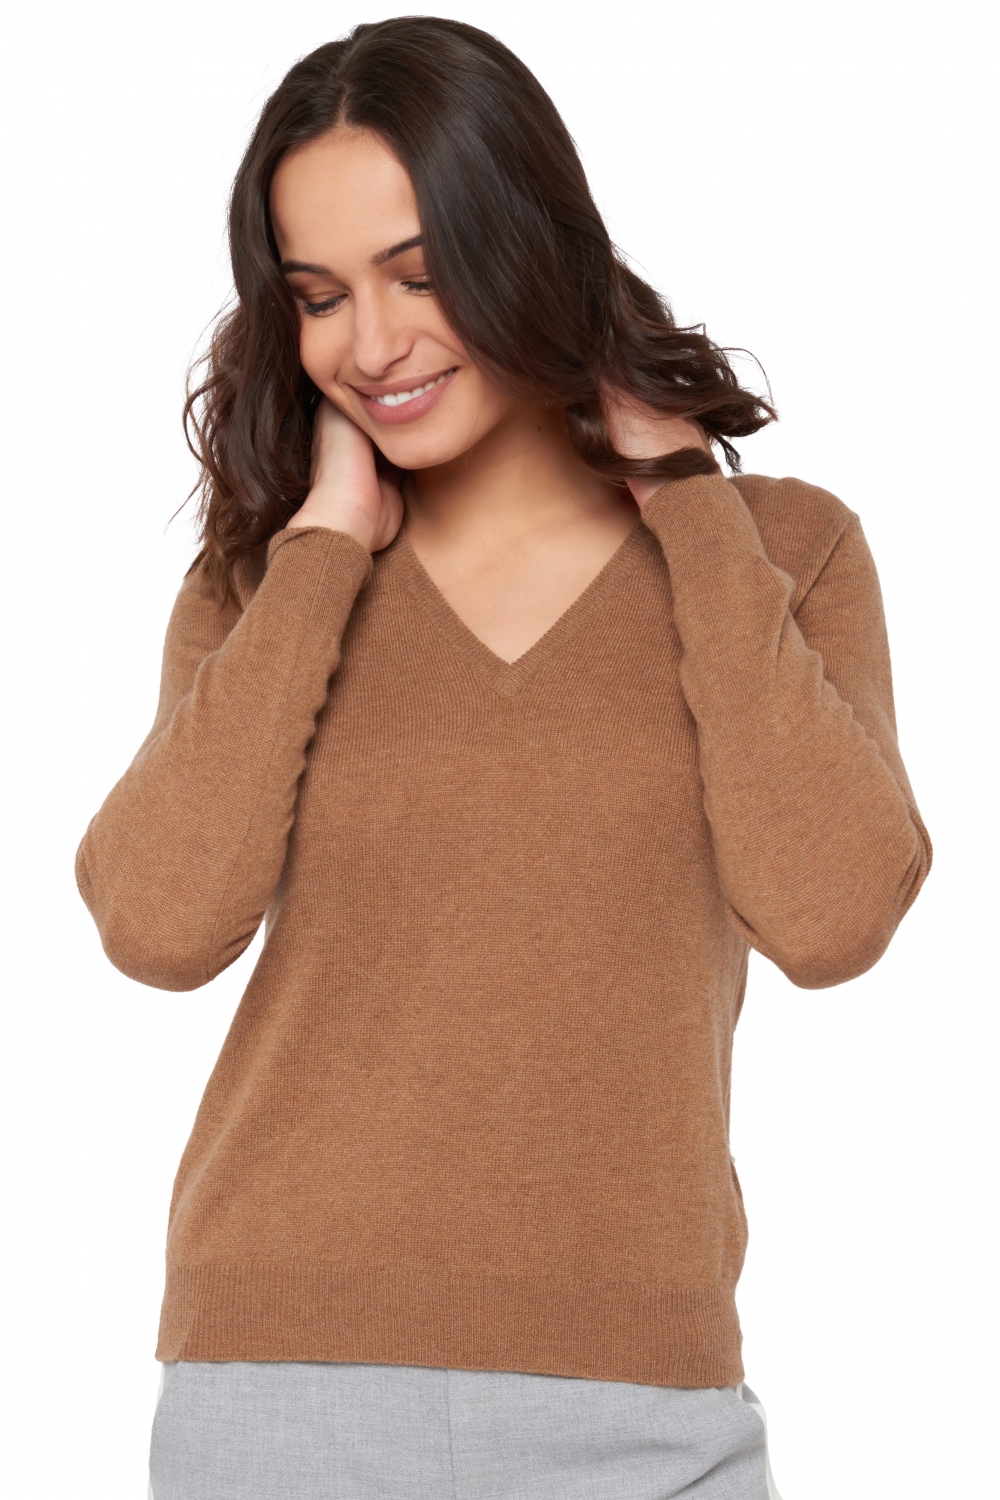 Cachemire pull femme faustine camel chine m